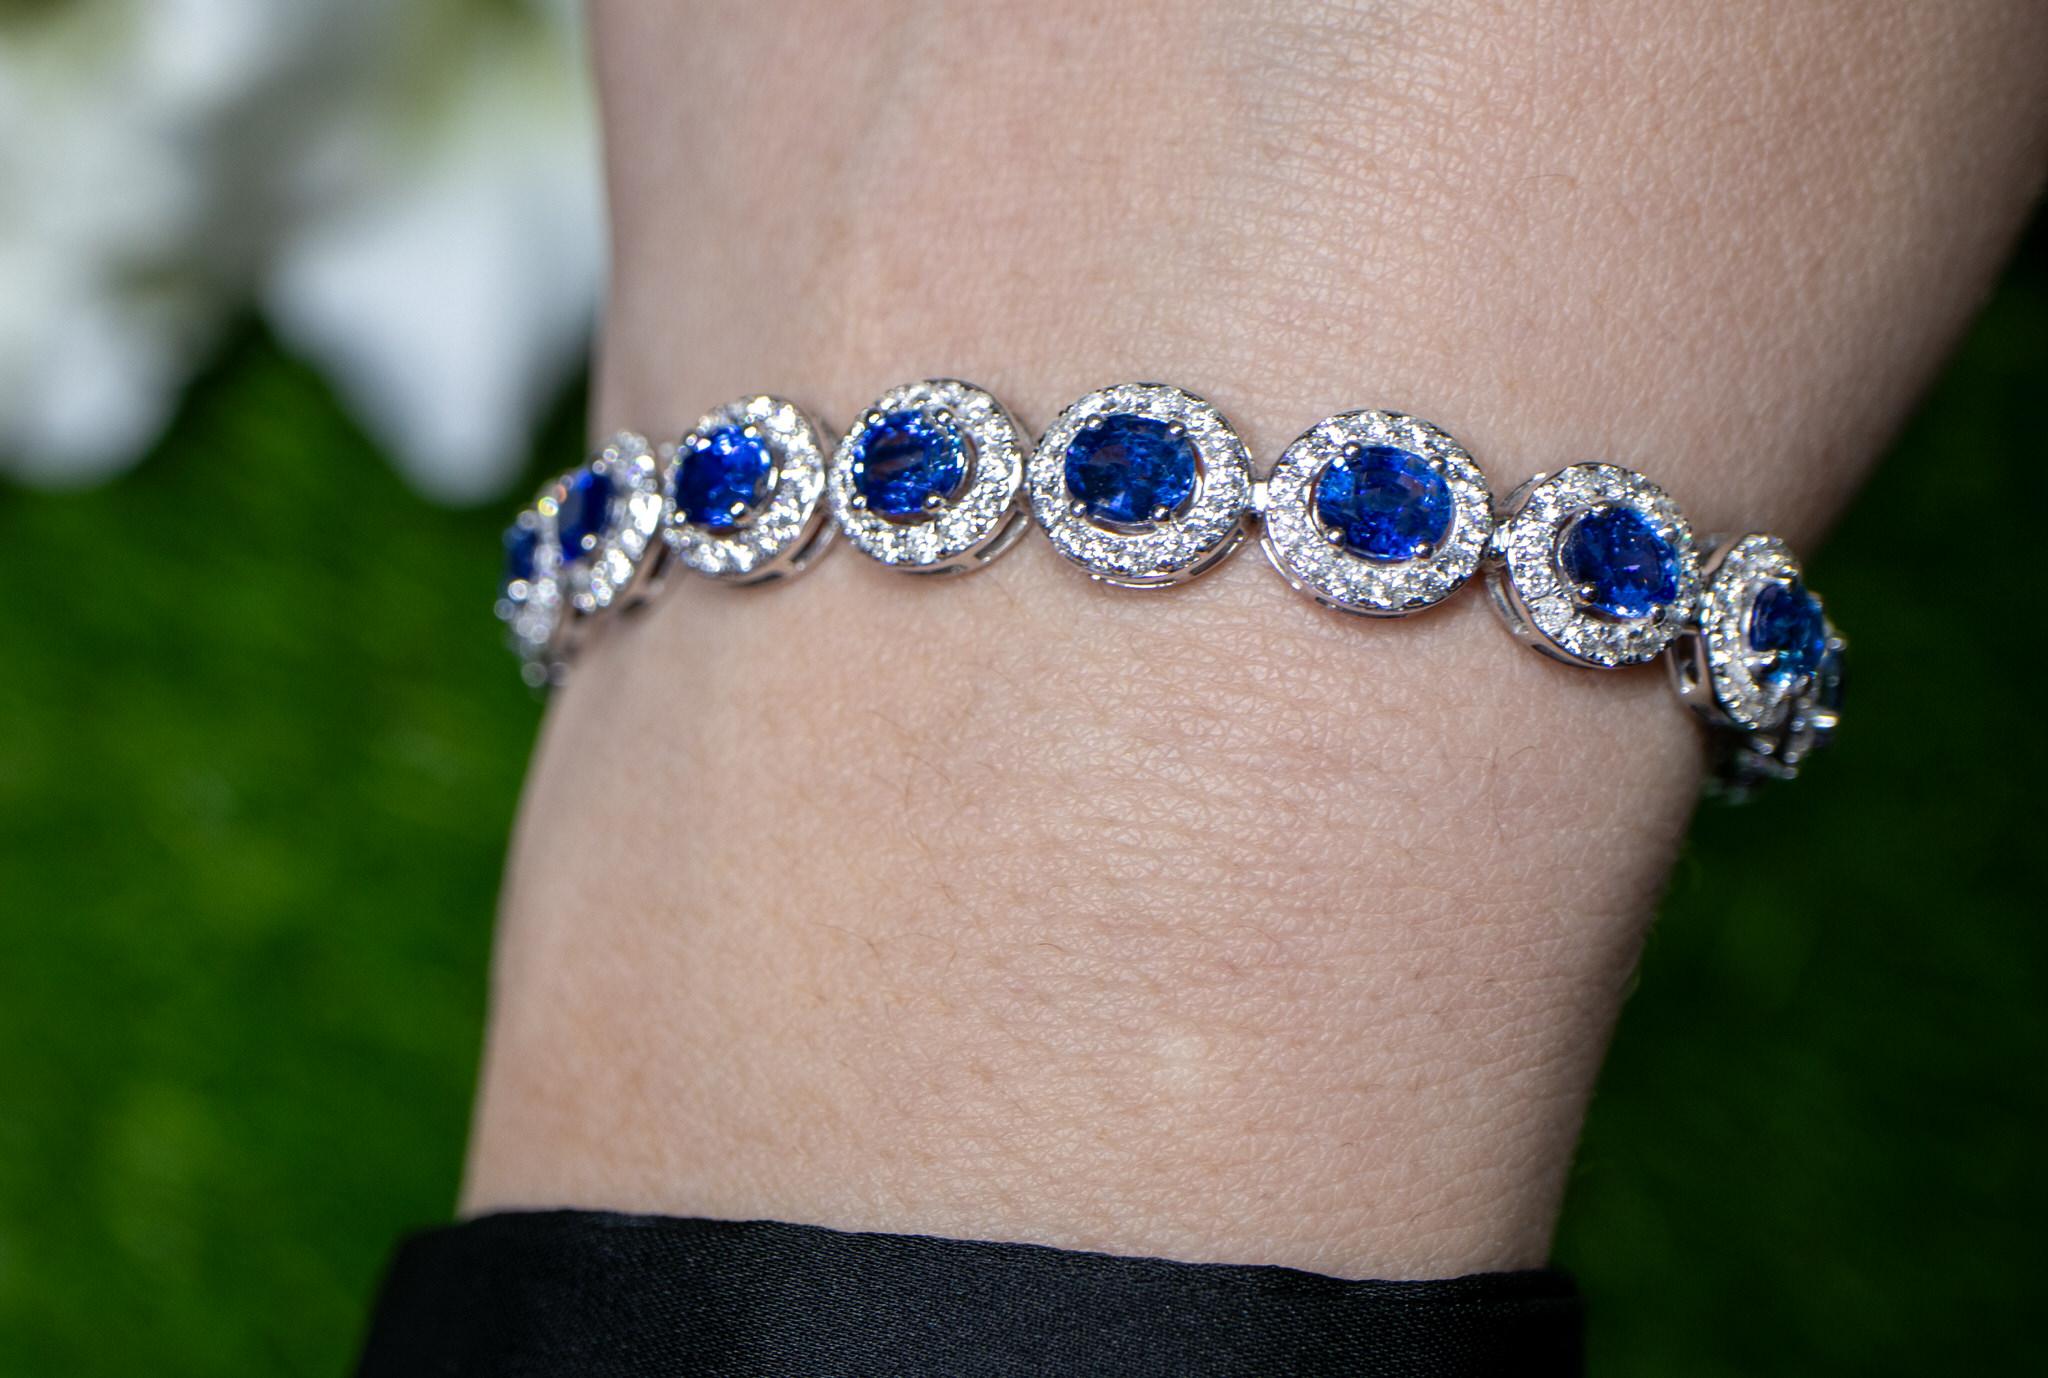 Blue Sapphire Bracelet Diamond Halo 14.7 Carats 18K Gold In Excellent Condition For Sale In Laguna Niguel, CA